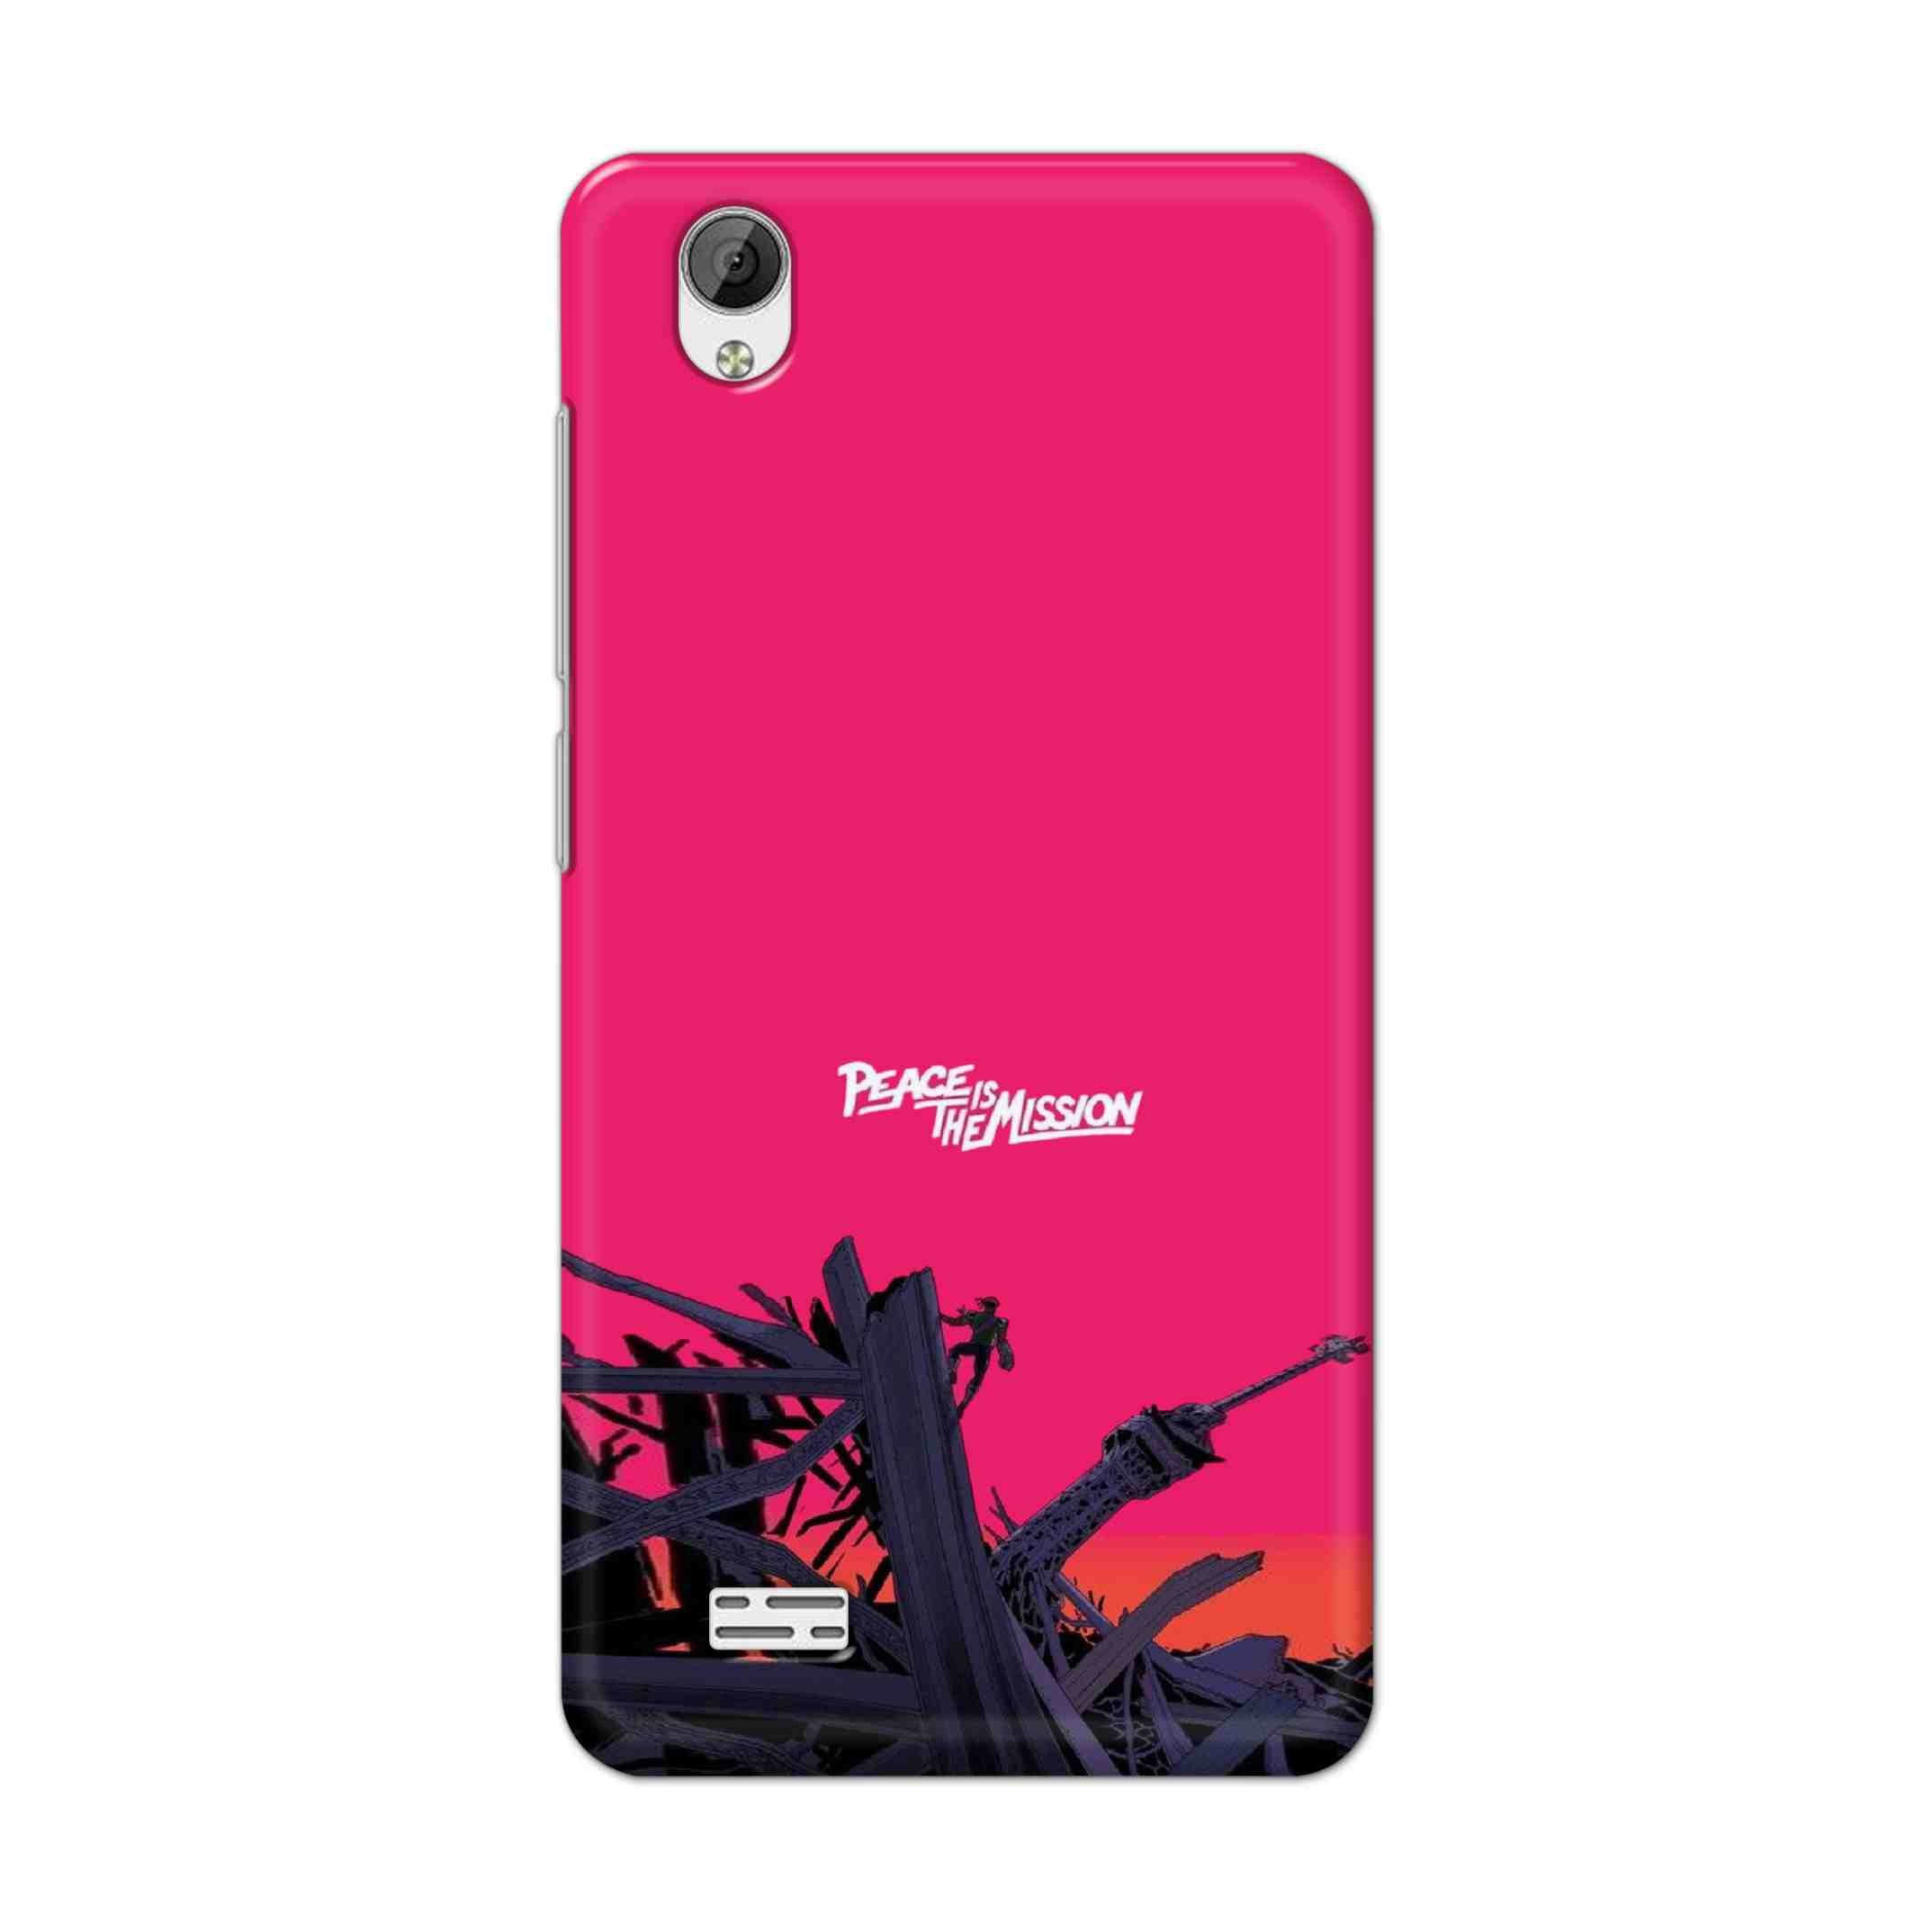 Buy Peace Is The Mission Hard Back Mobile Phone Case Cover For Vivo Y31 Online